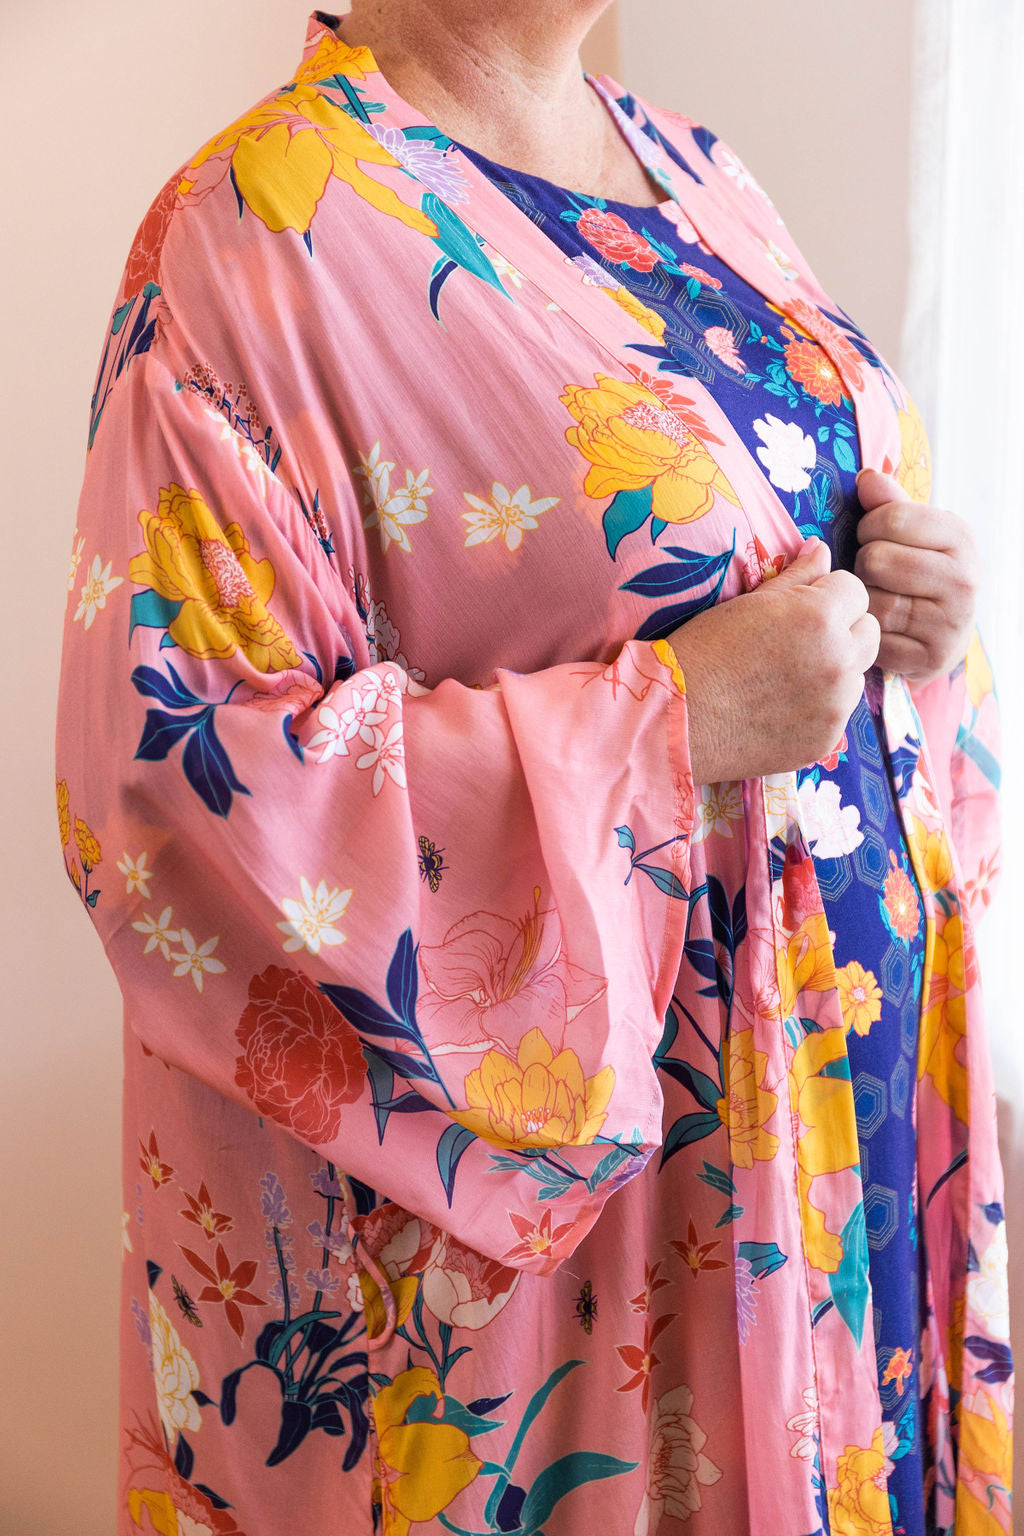 pink fiorella print chimono robe showing flowers and bees in the print